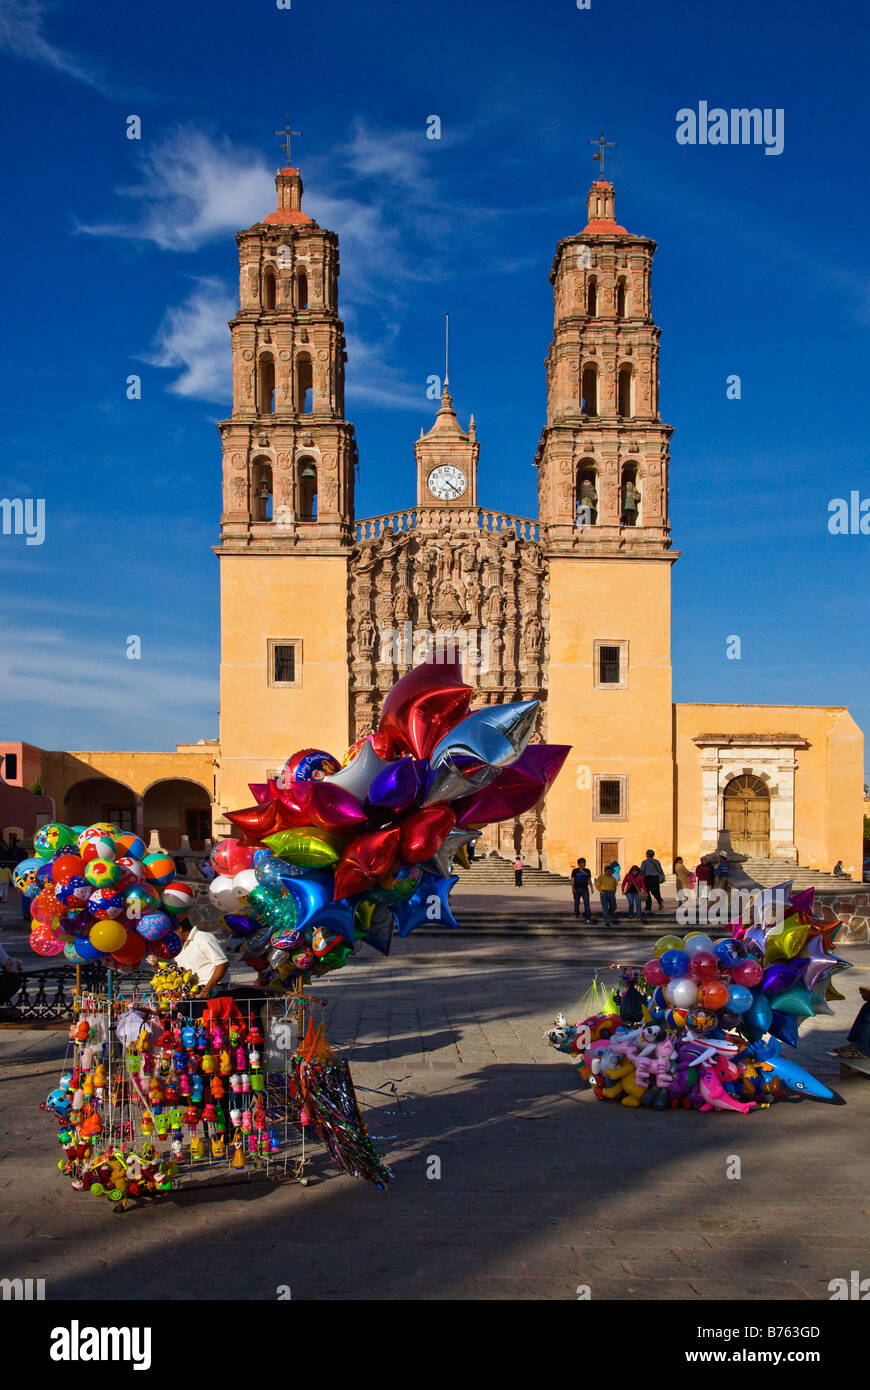 BALOONS are sold in front of the DOLORES HIDALGO CATHEDRAL built in the 16th century GUANAJUATO MEXICO Stock Photo